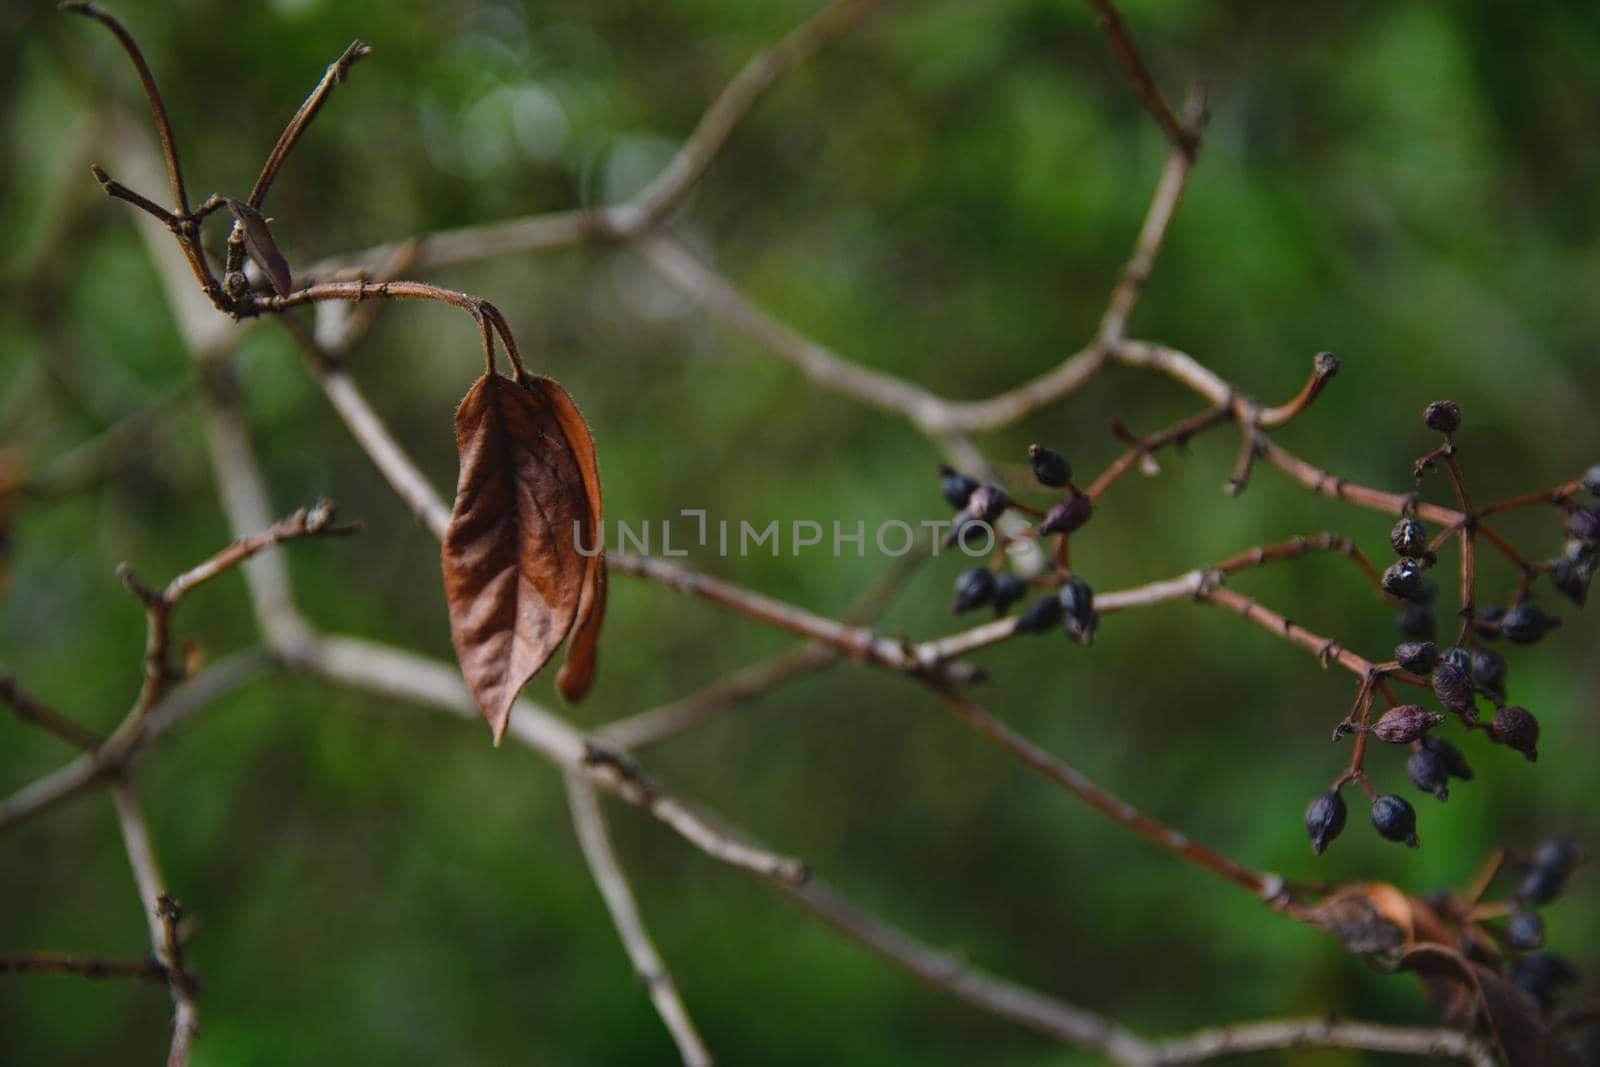 Dry autumn leaf on a branch with black dry berries